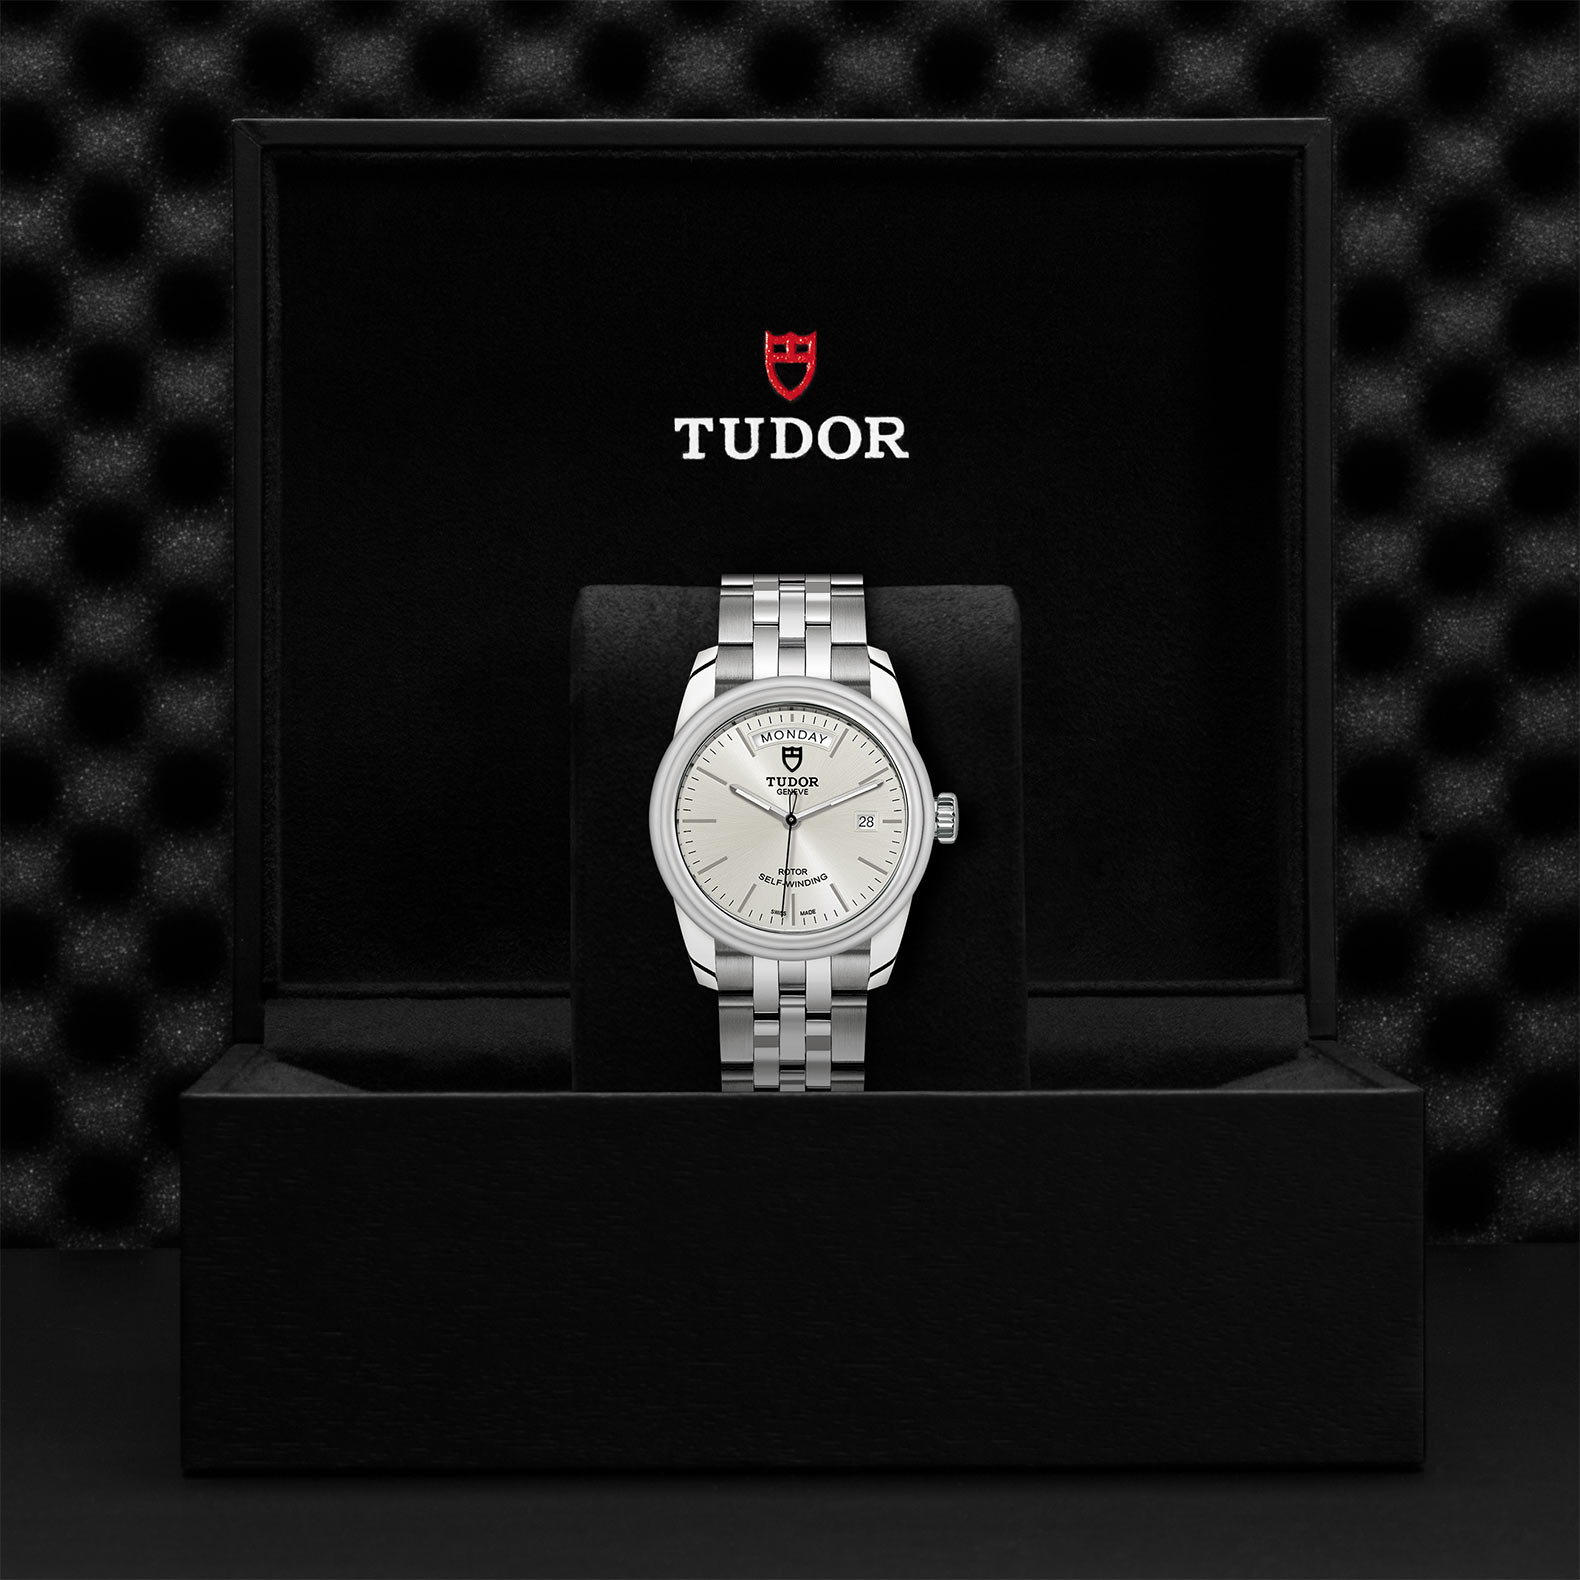 TUDOR Glamour Date+Day - M56000-0005